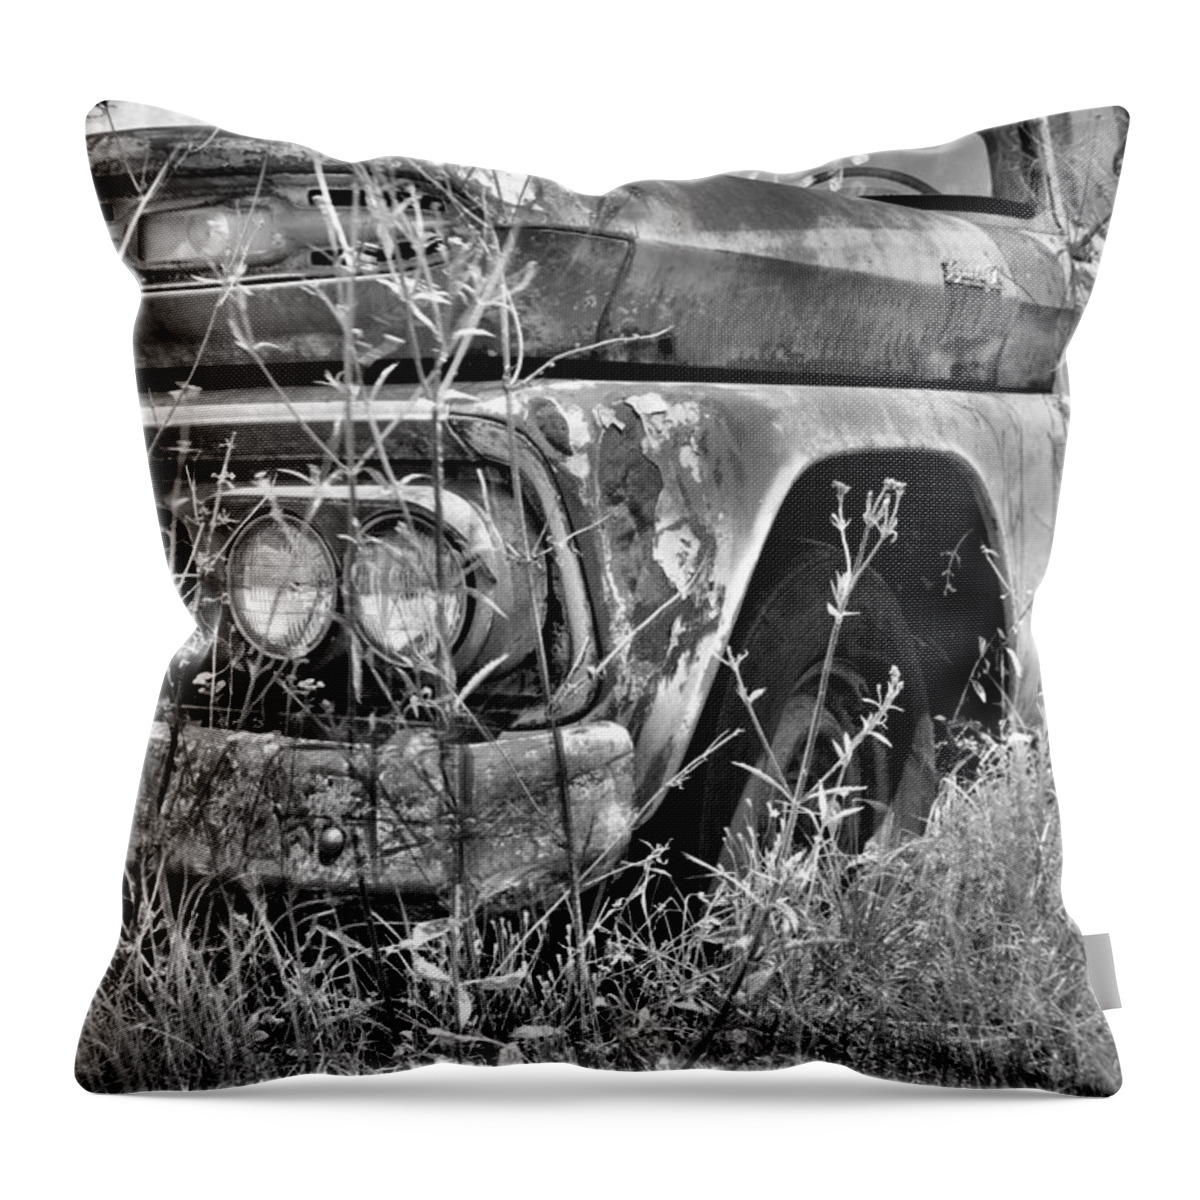 1961 Chevrolet Apache 10 Black And White 4 Throw Pillow featuring the photograph 1961 Chevrolet Apache 10 Black And White 4 by Lisa Wooten